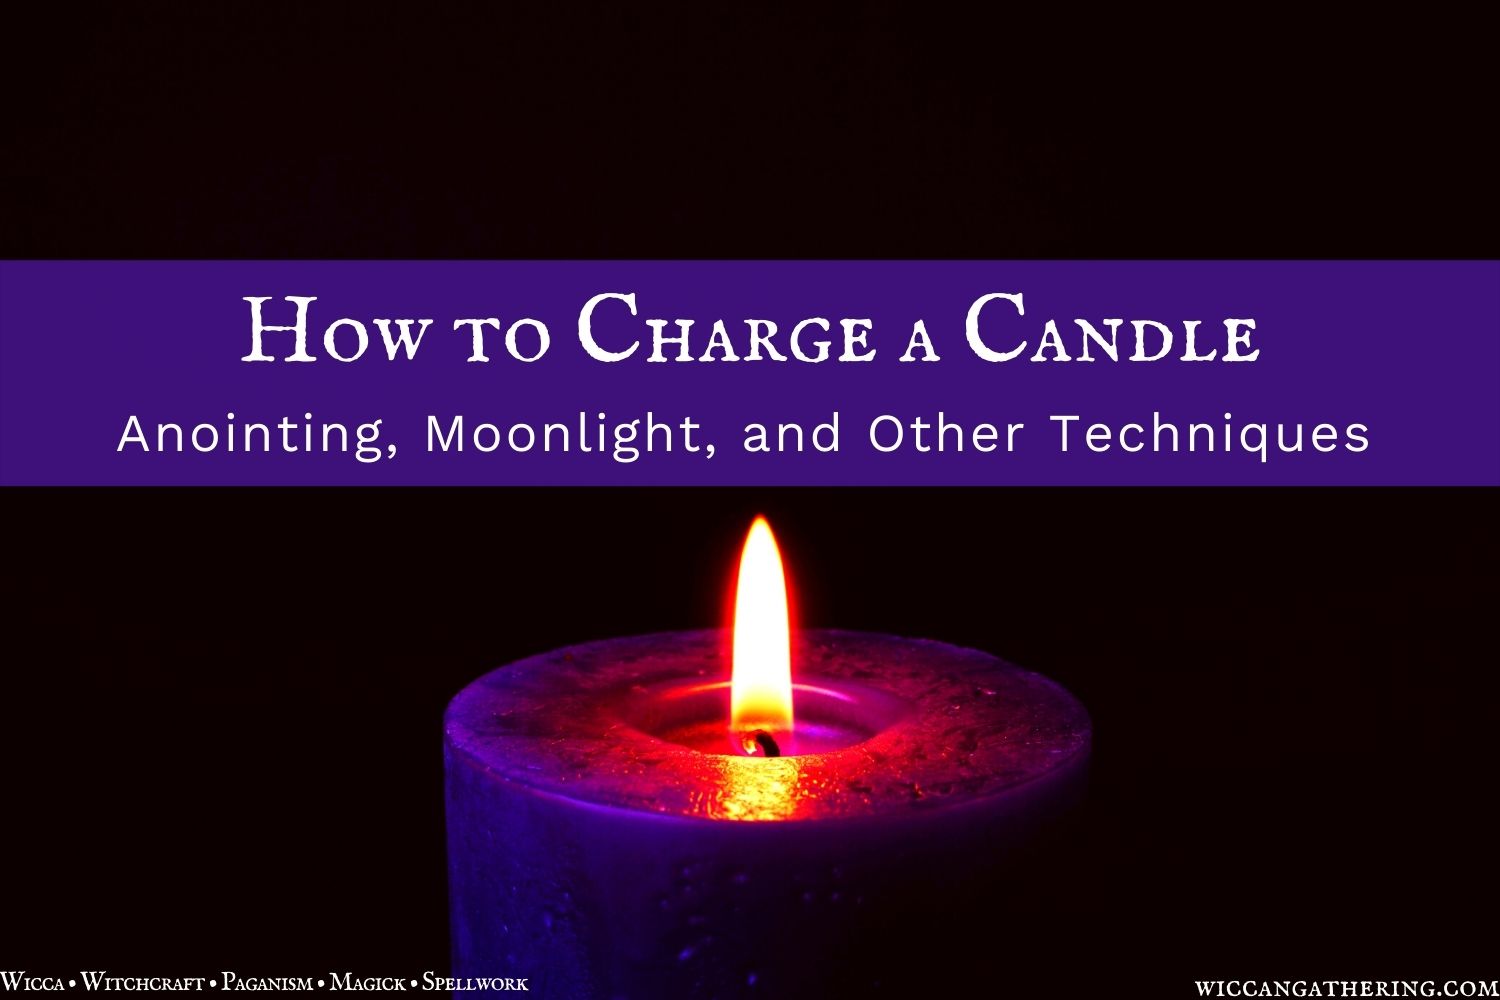 How to Charge a Candle